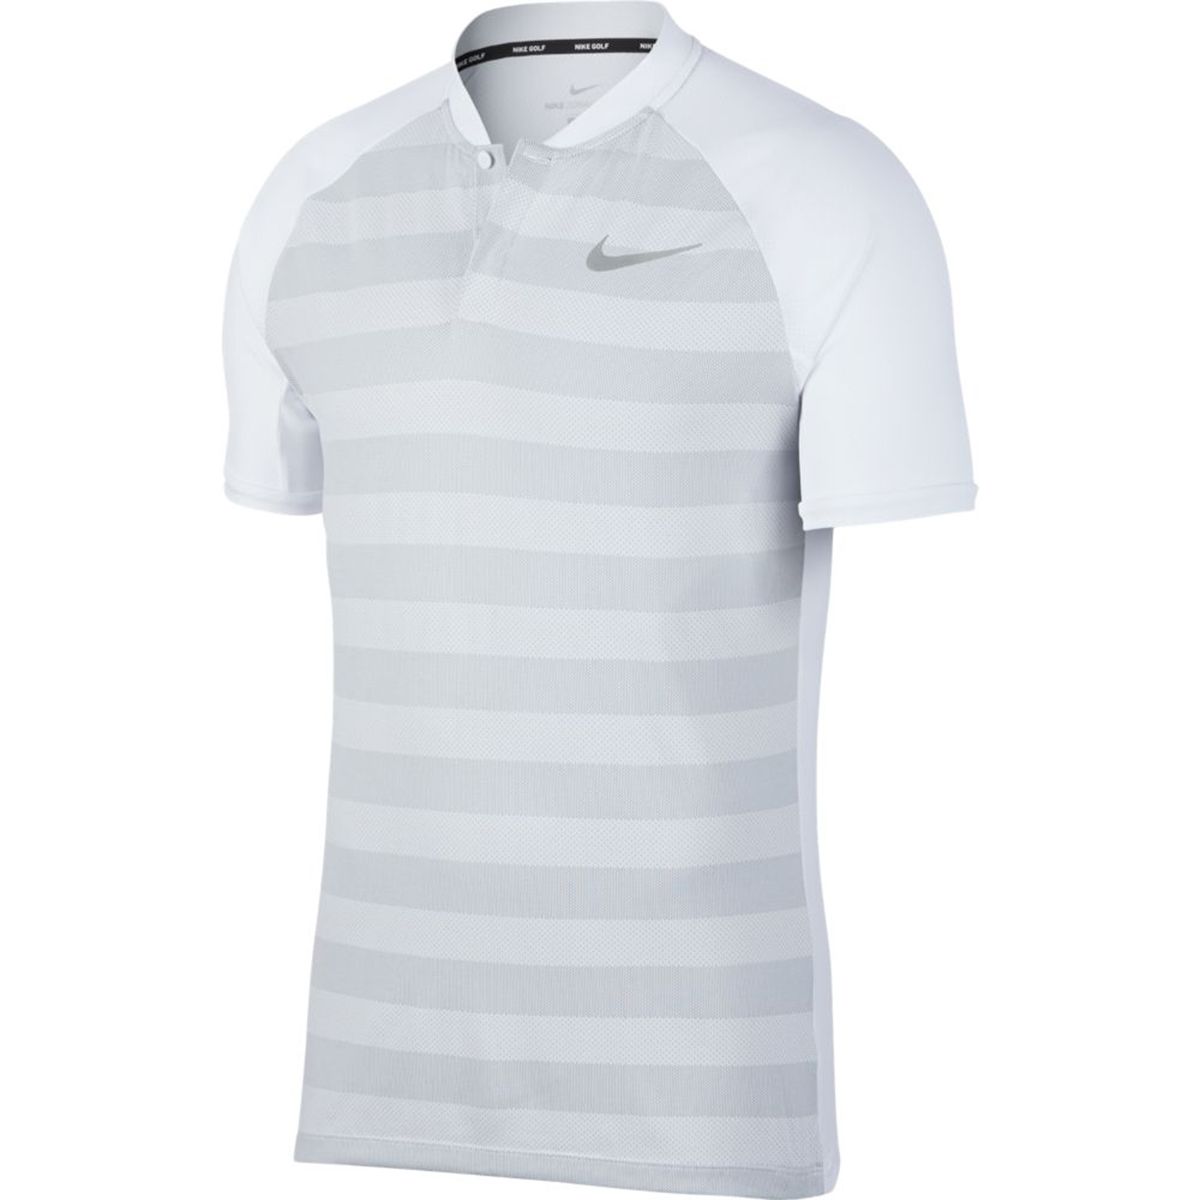 Formulering enthousiast Publicatie Nike Zonal Cooling Momentum Polo 933318 | Discount Golf World